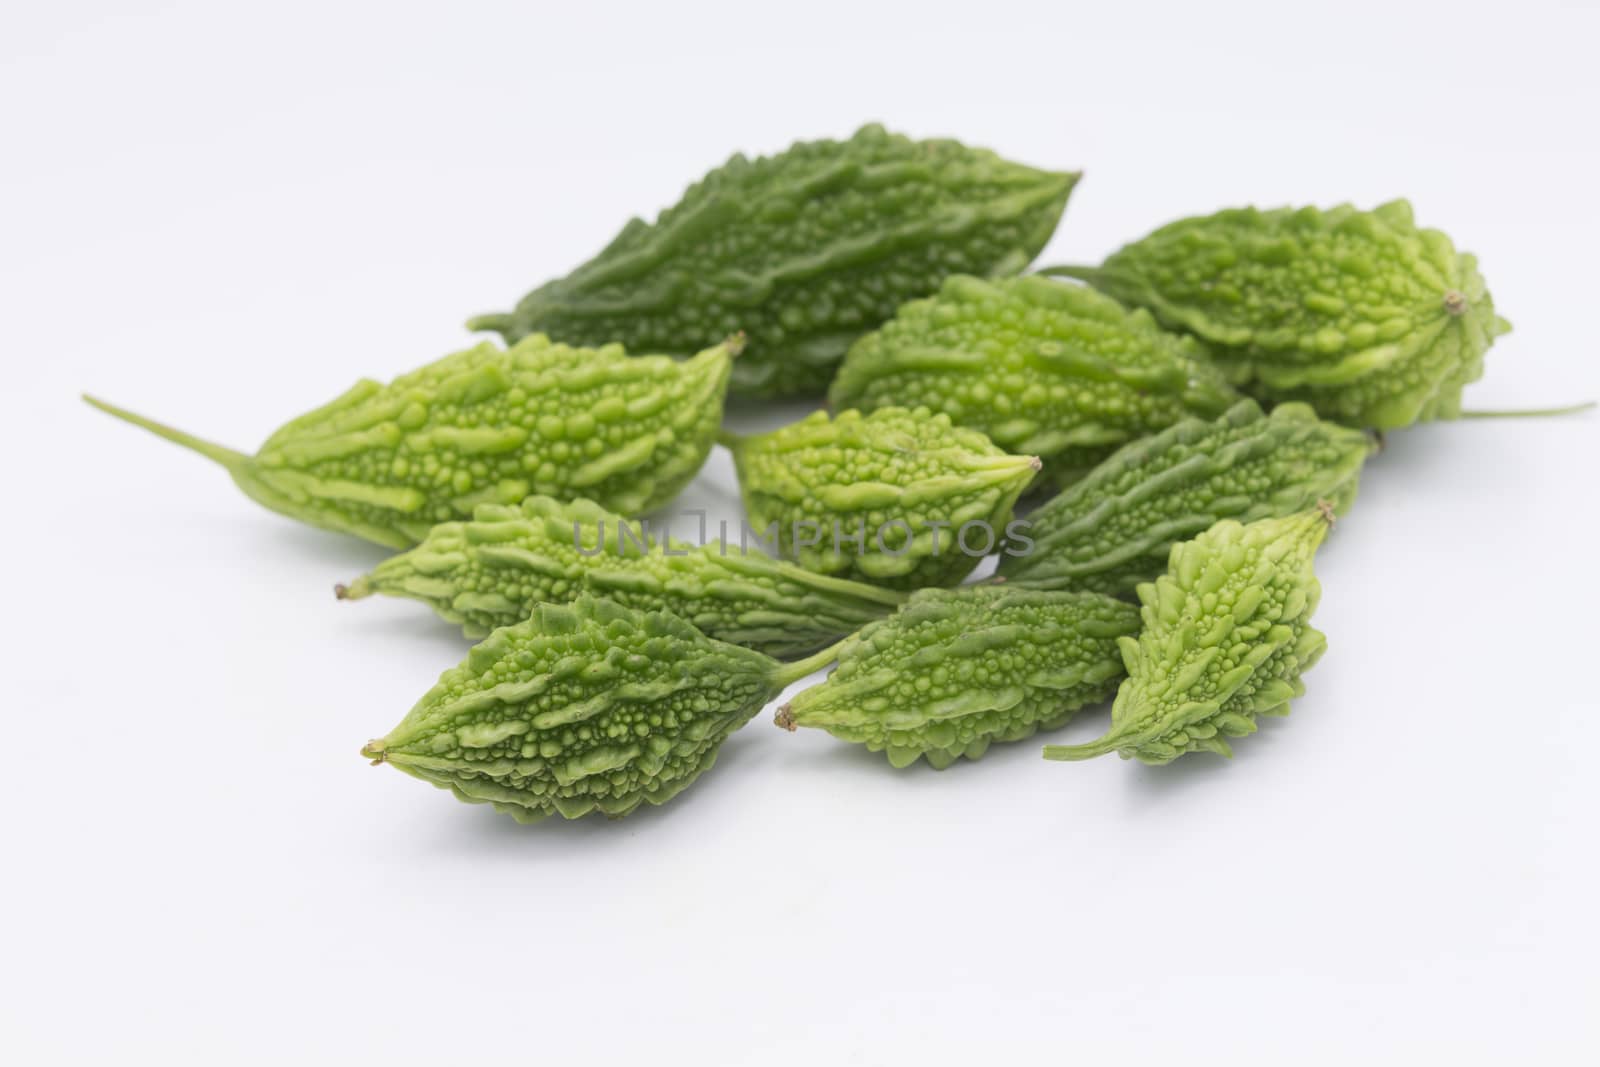 Green Momordica or karela with leaf isolate on white bacground